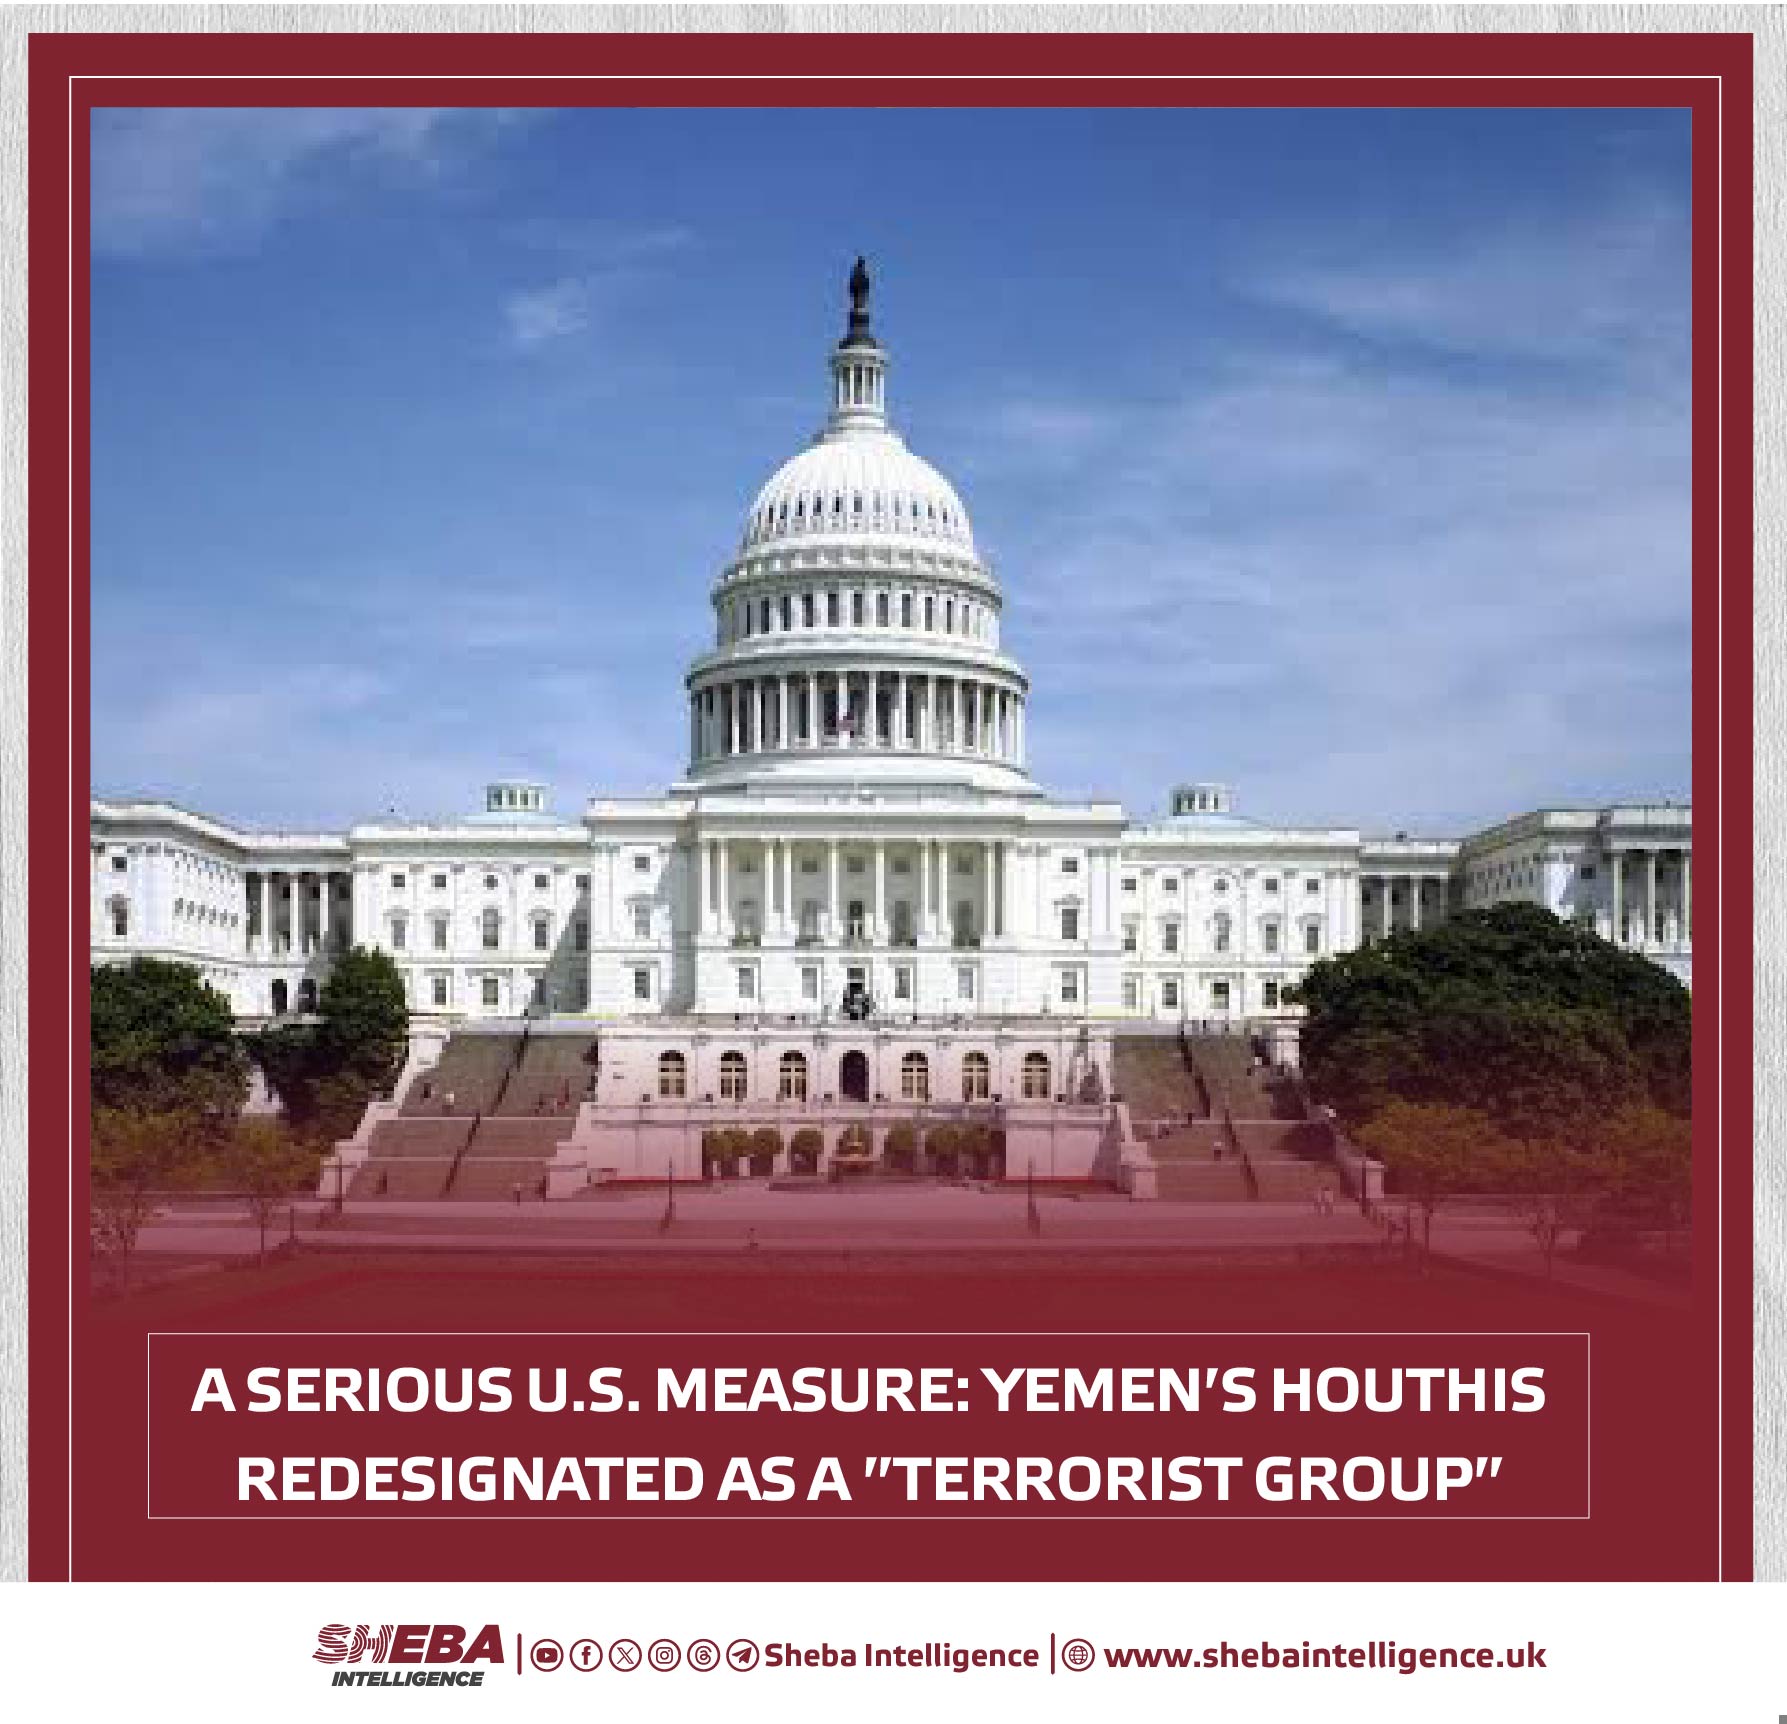 A Serious U.S. Measure: Yemen's Houthis Redesignated as a "Terrorist Group"